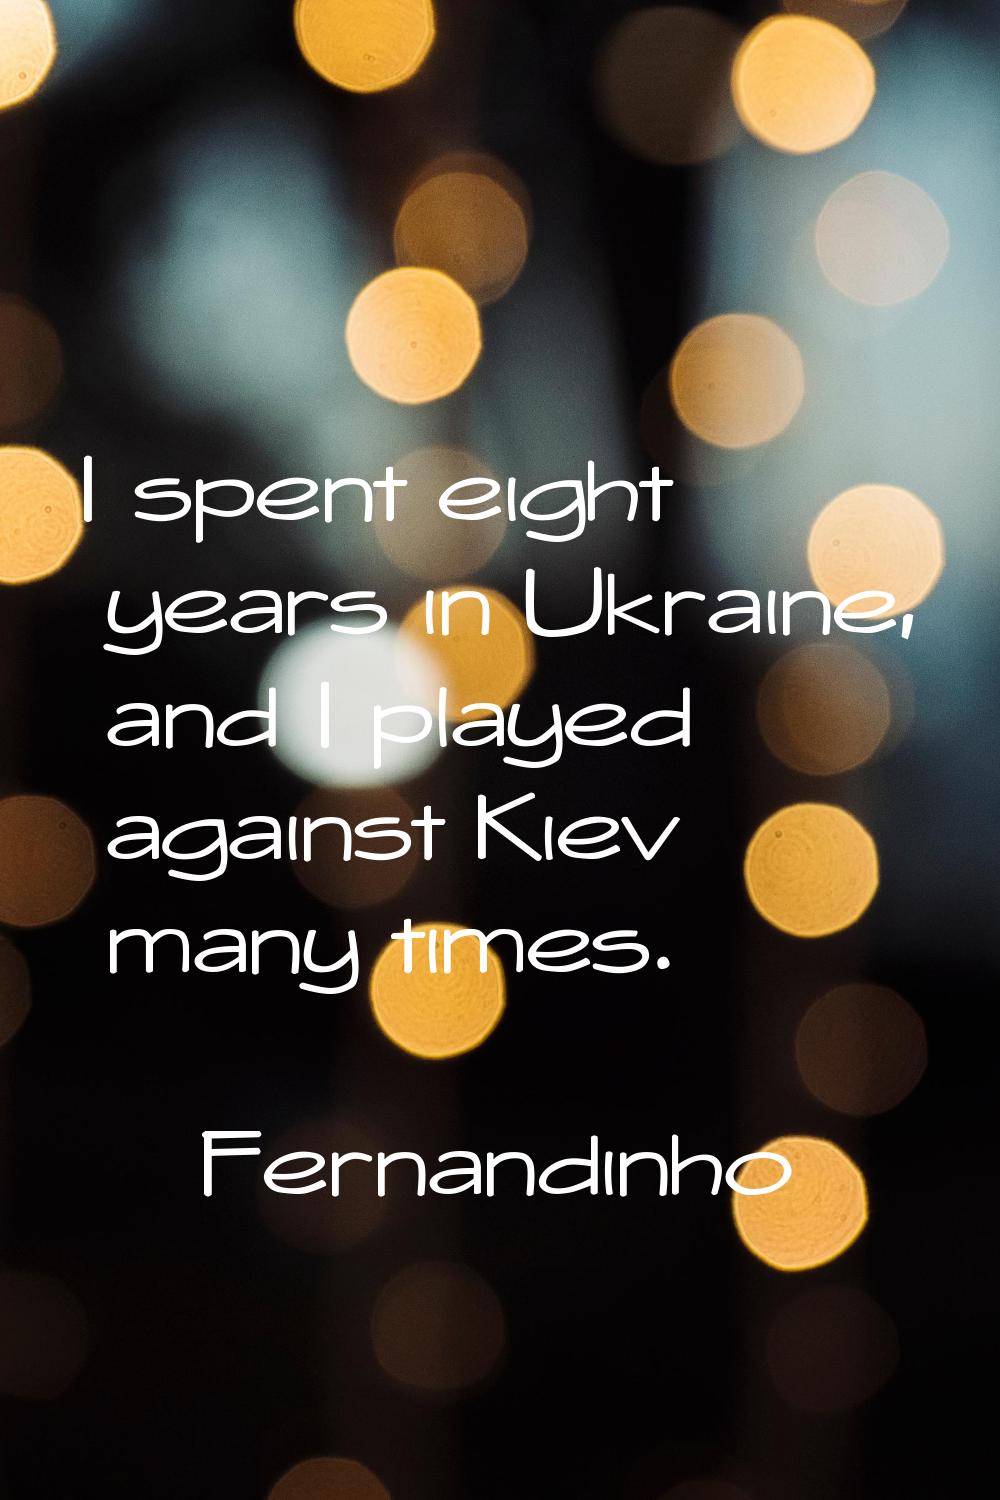 I spent eight years in Ukraine, and I played against Kiev many times.